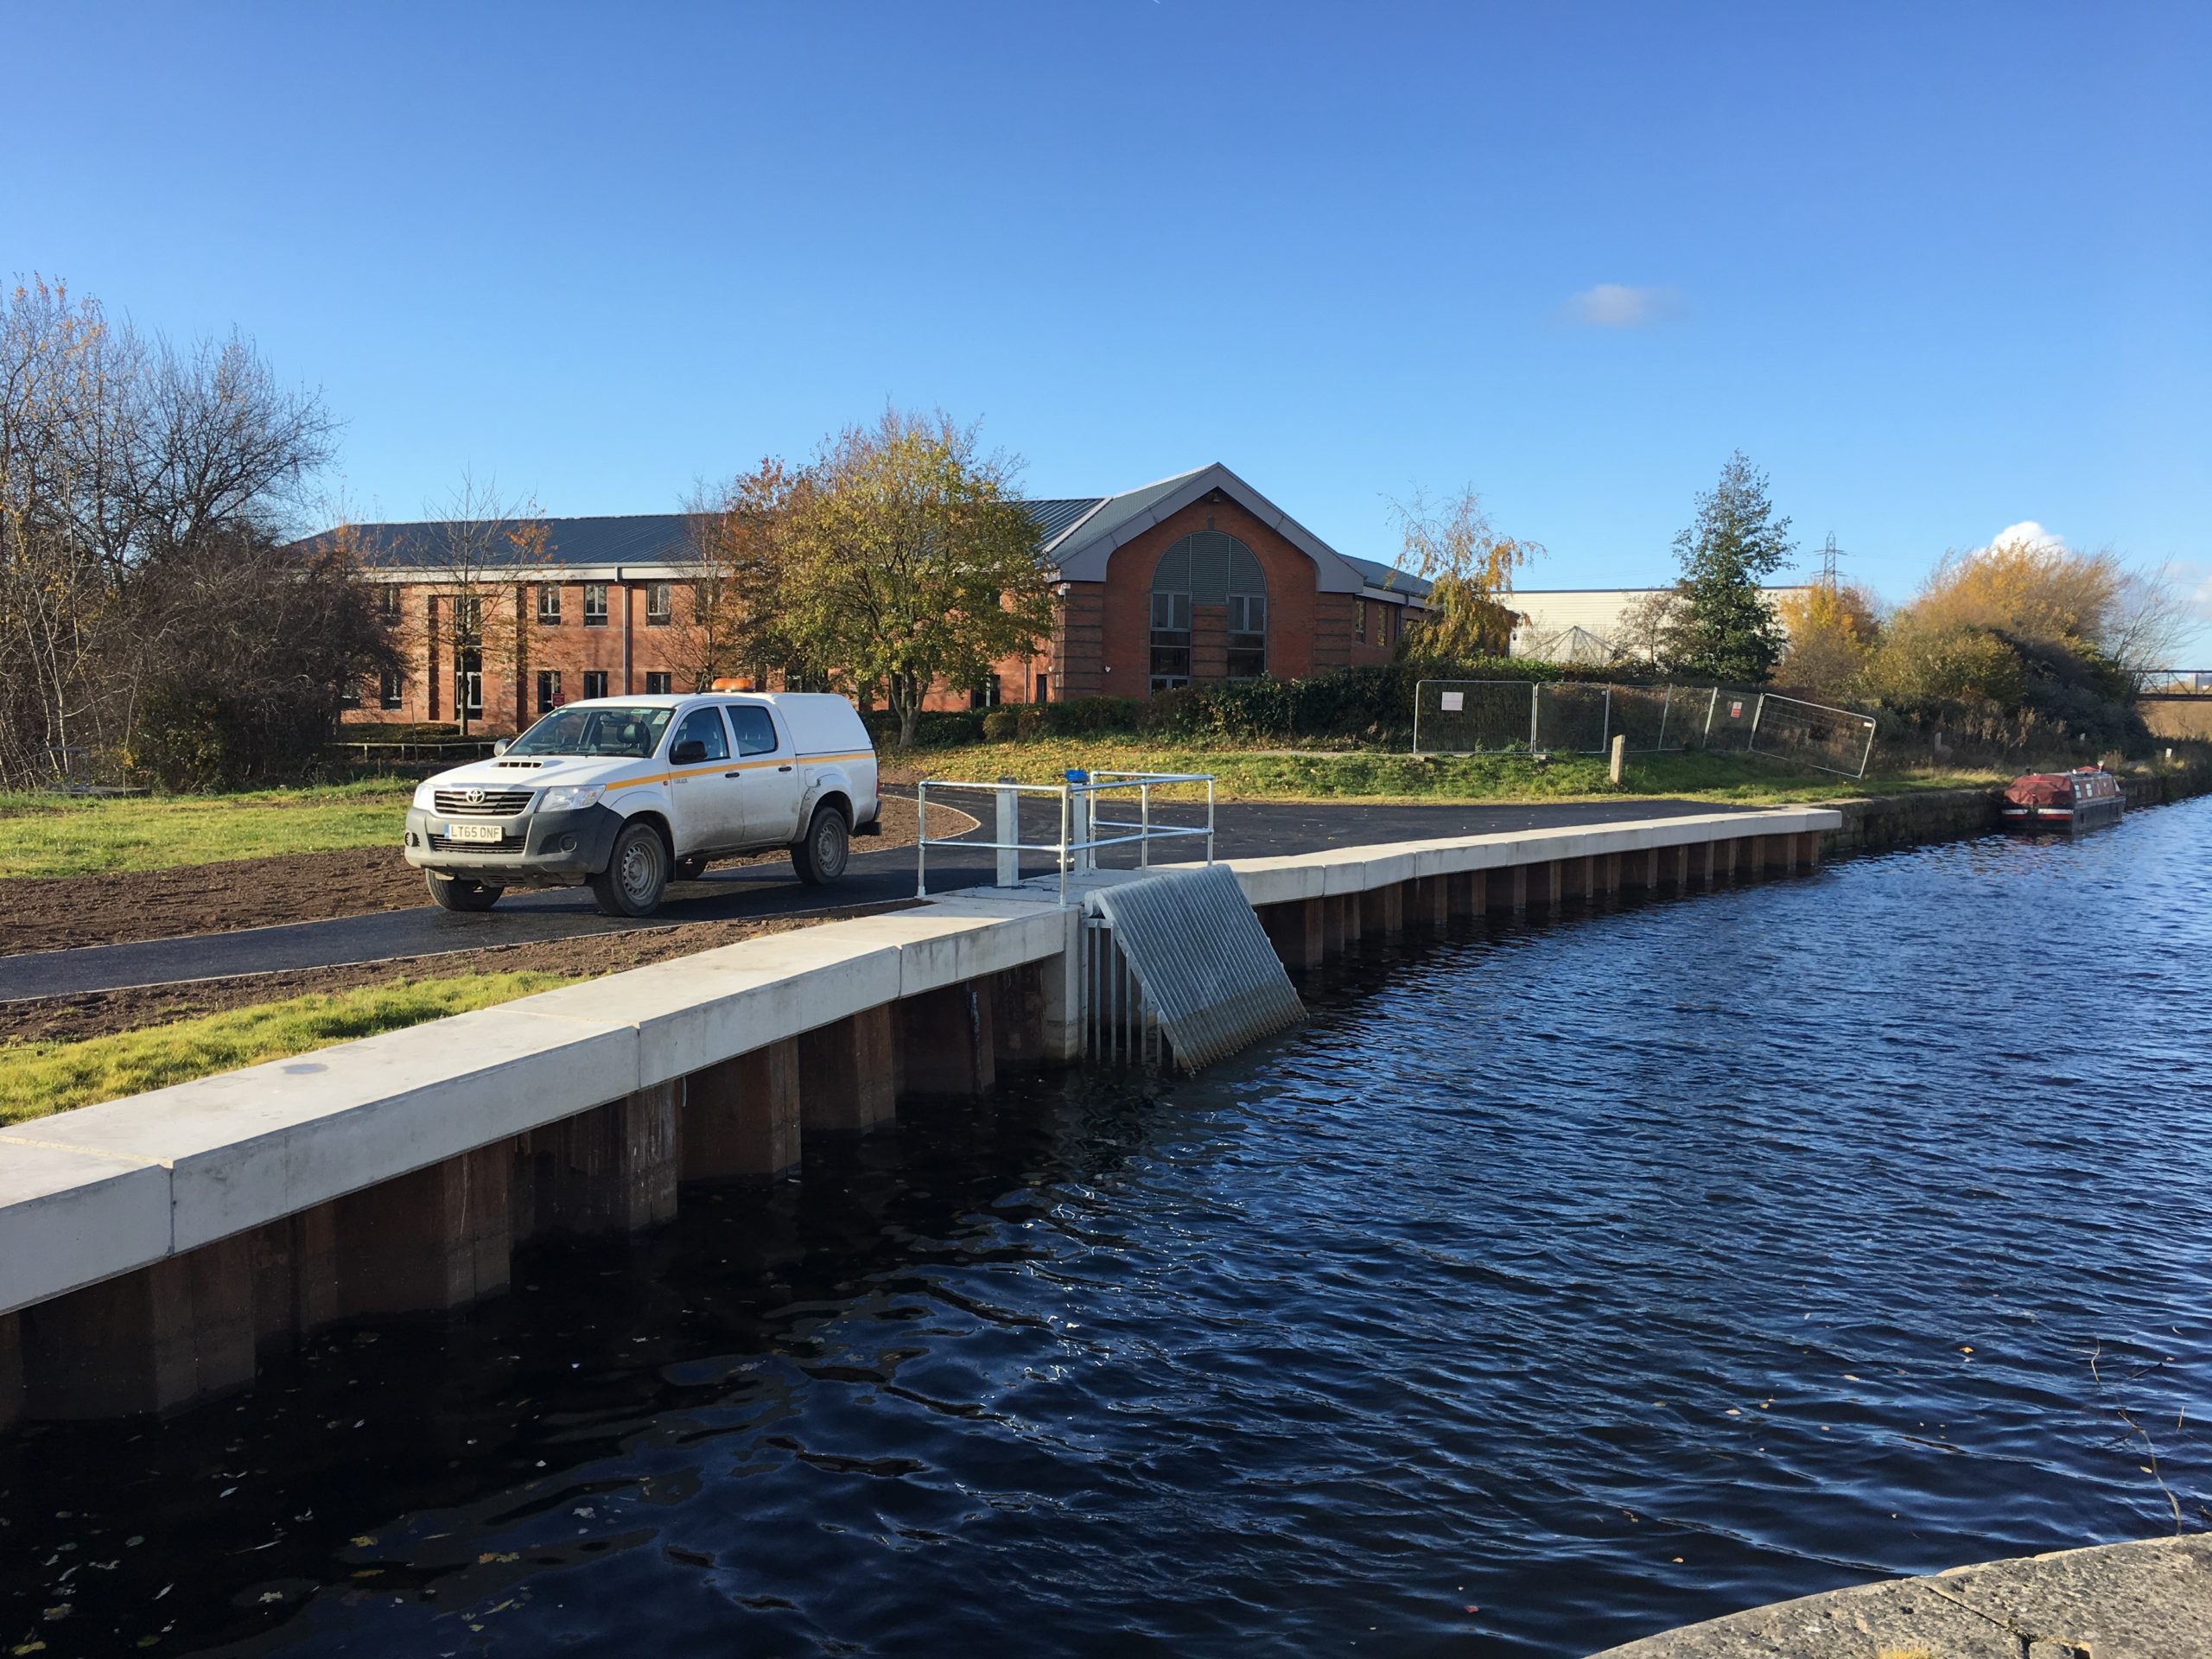 FSP aids solution to flooding in Leeds